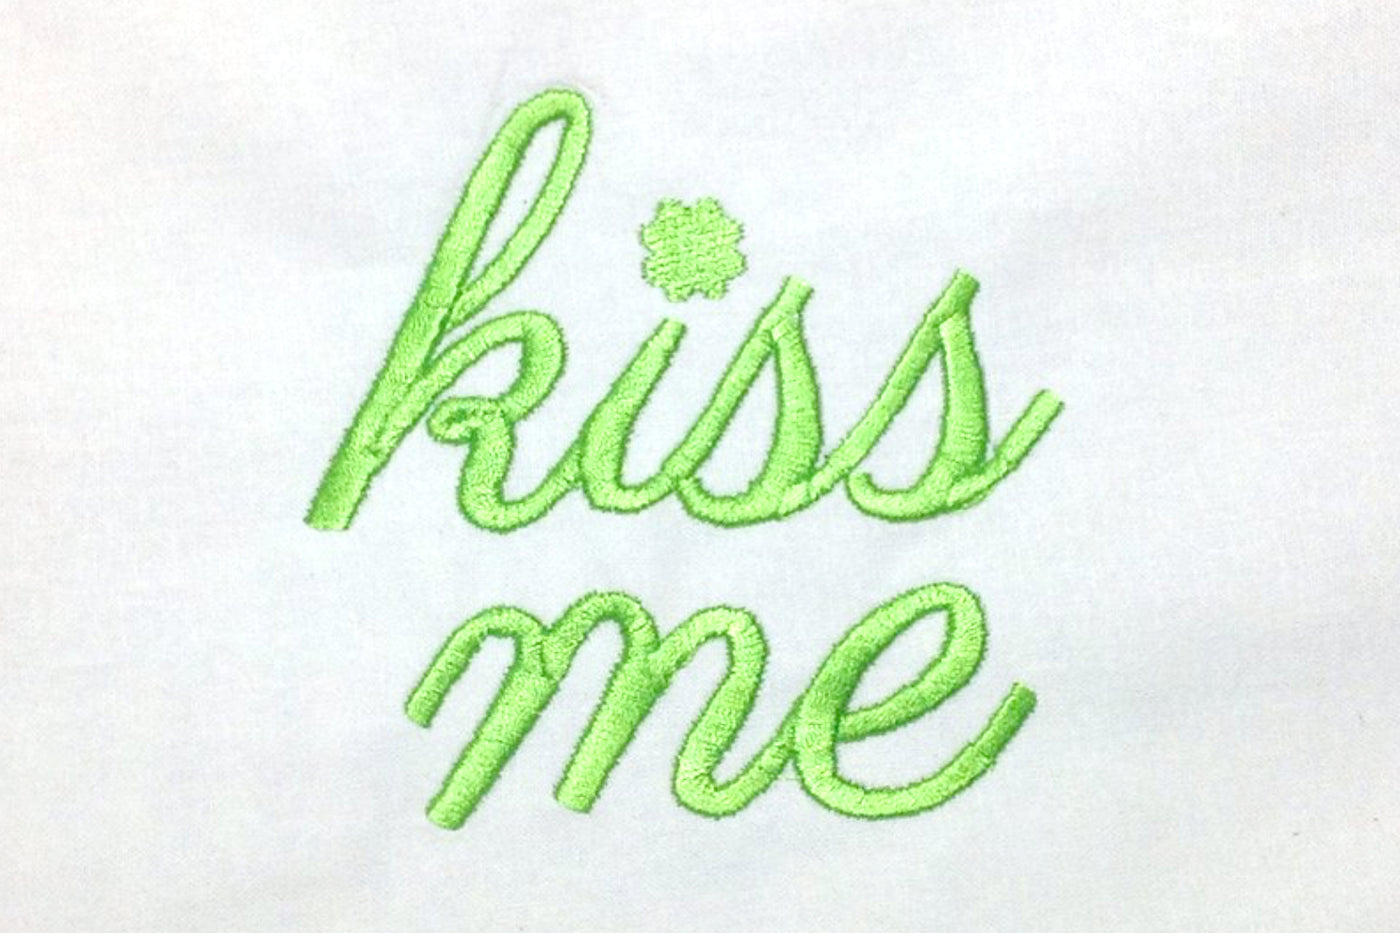 Embroidery design that says "kiss me" with a clover for the dot on the i.